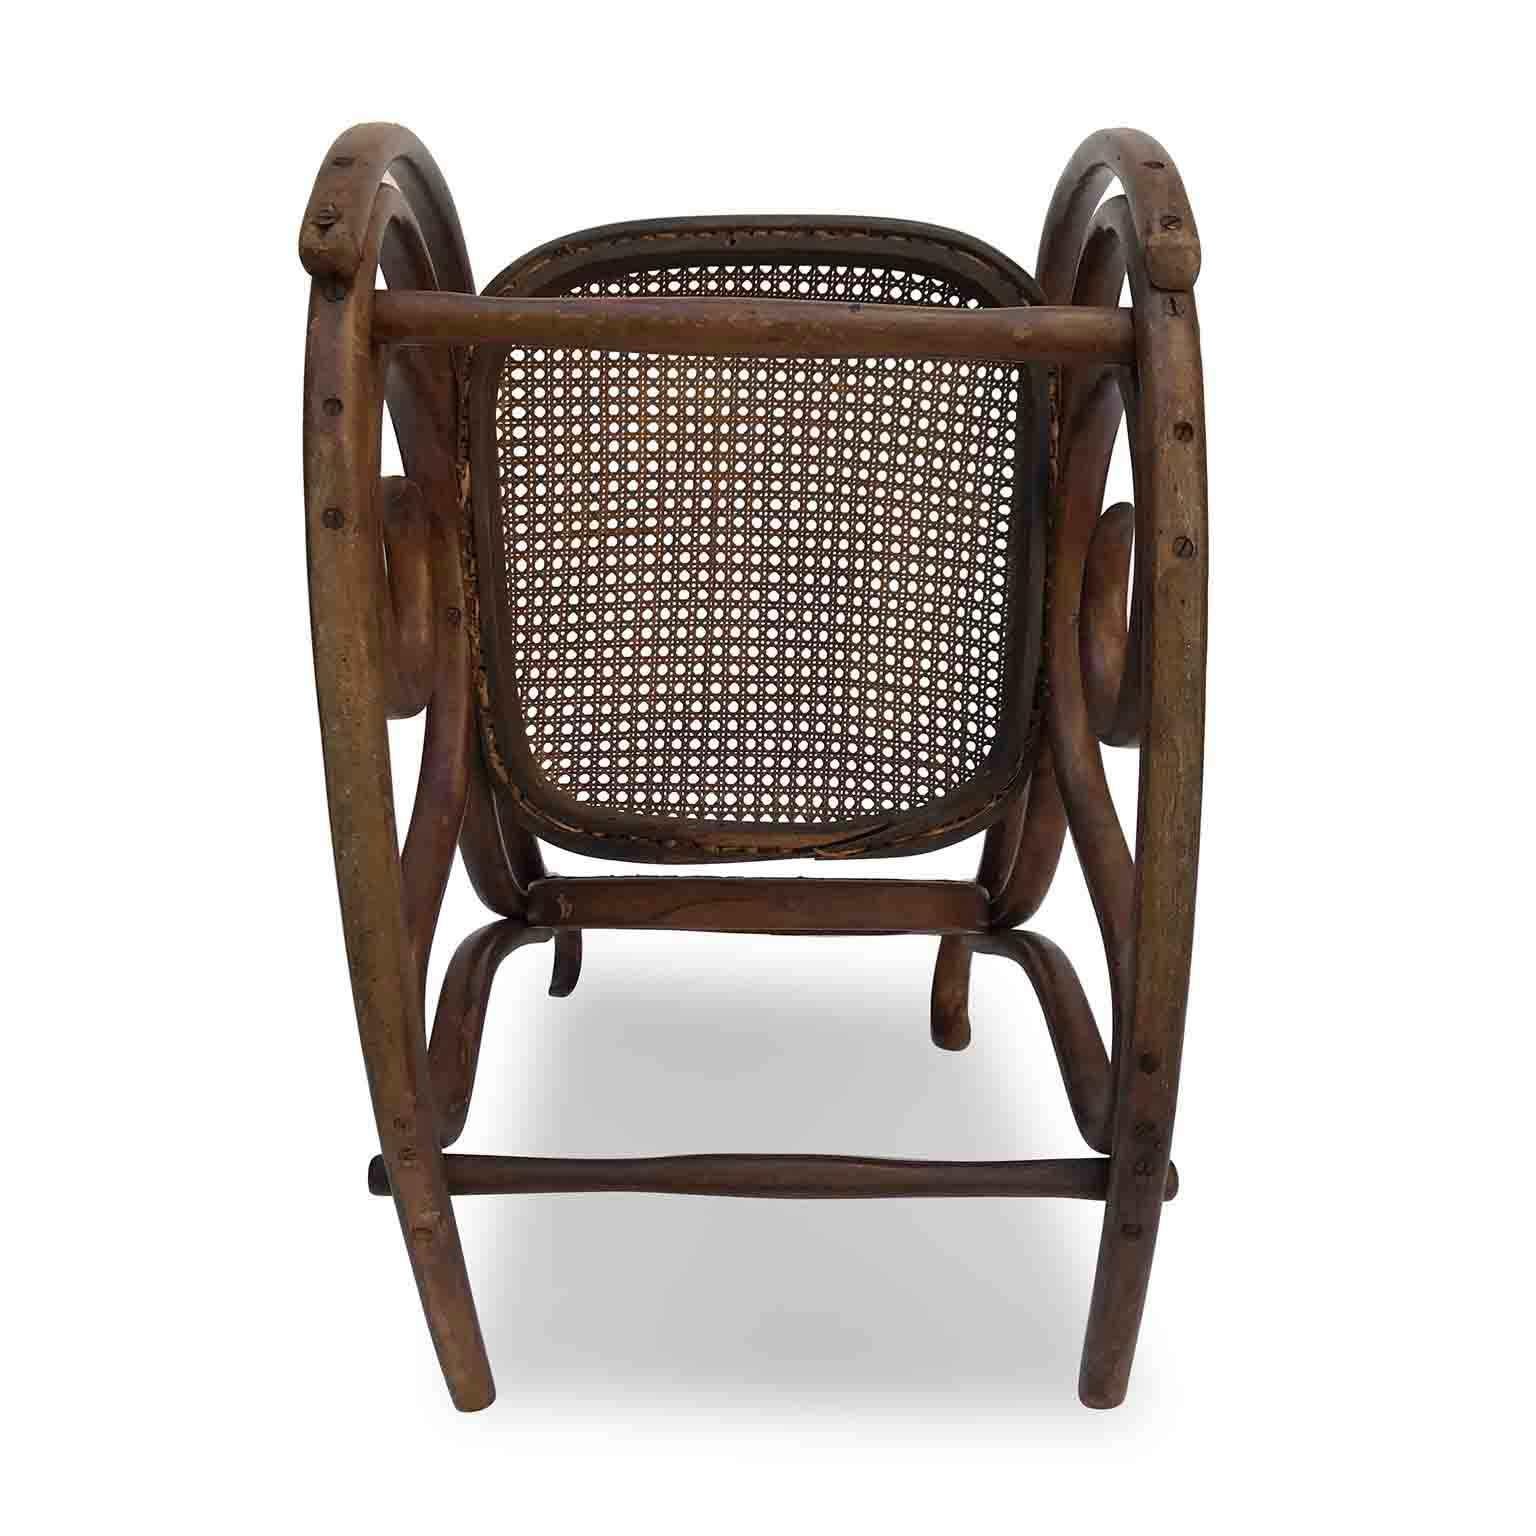 Vienna Secession 20th Century Thonet Style Beech Bentwood Child Rocking Chair with Cane